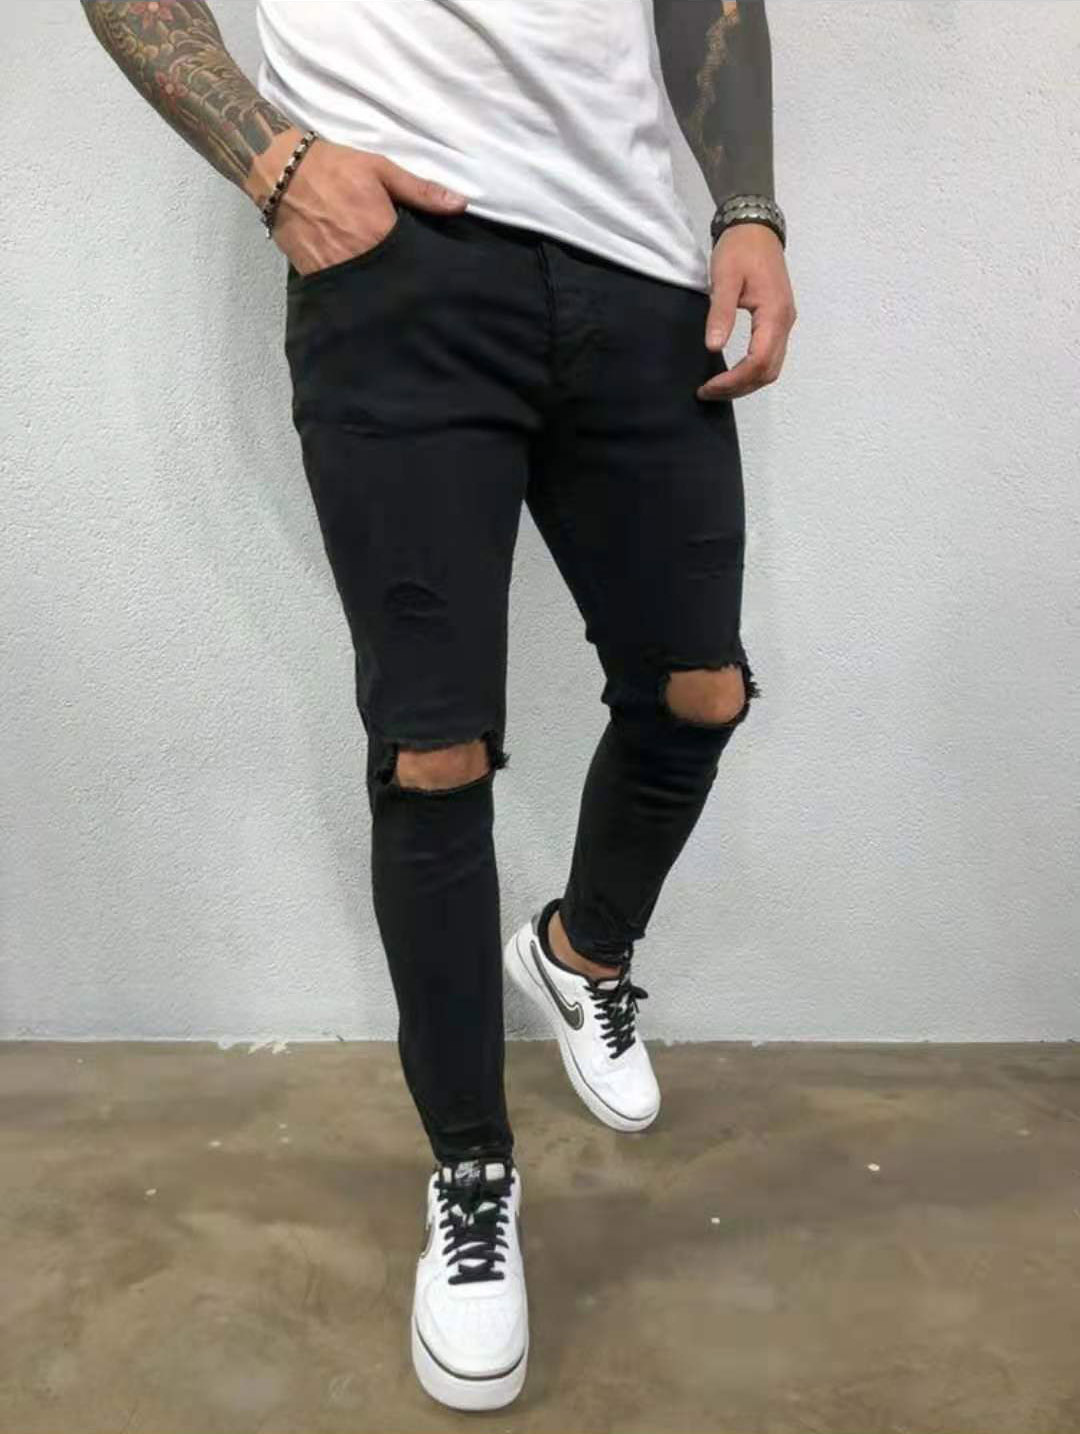 Ripped Jeans for man Lalaki Maong Skinny Pants Tattered Jeans Stretchable  Denim | Lazada PH